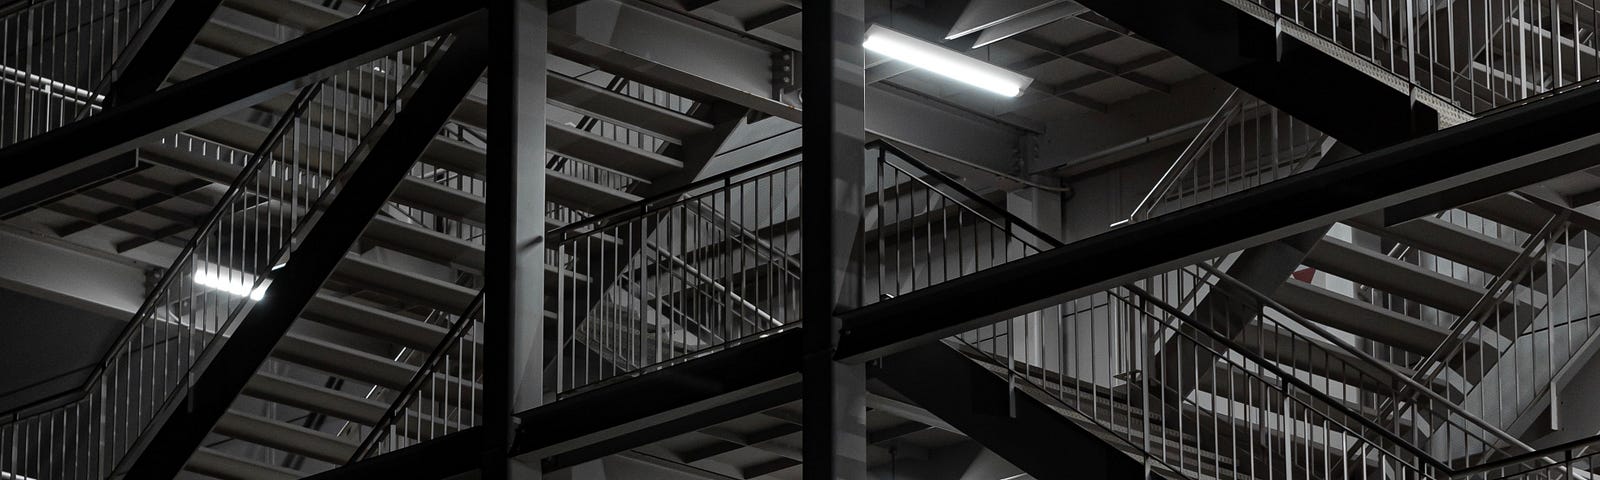 A black and white image of open steel stairs and beams